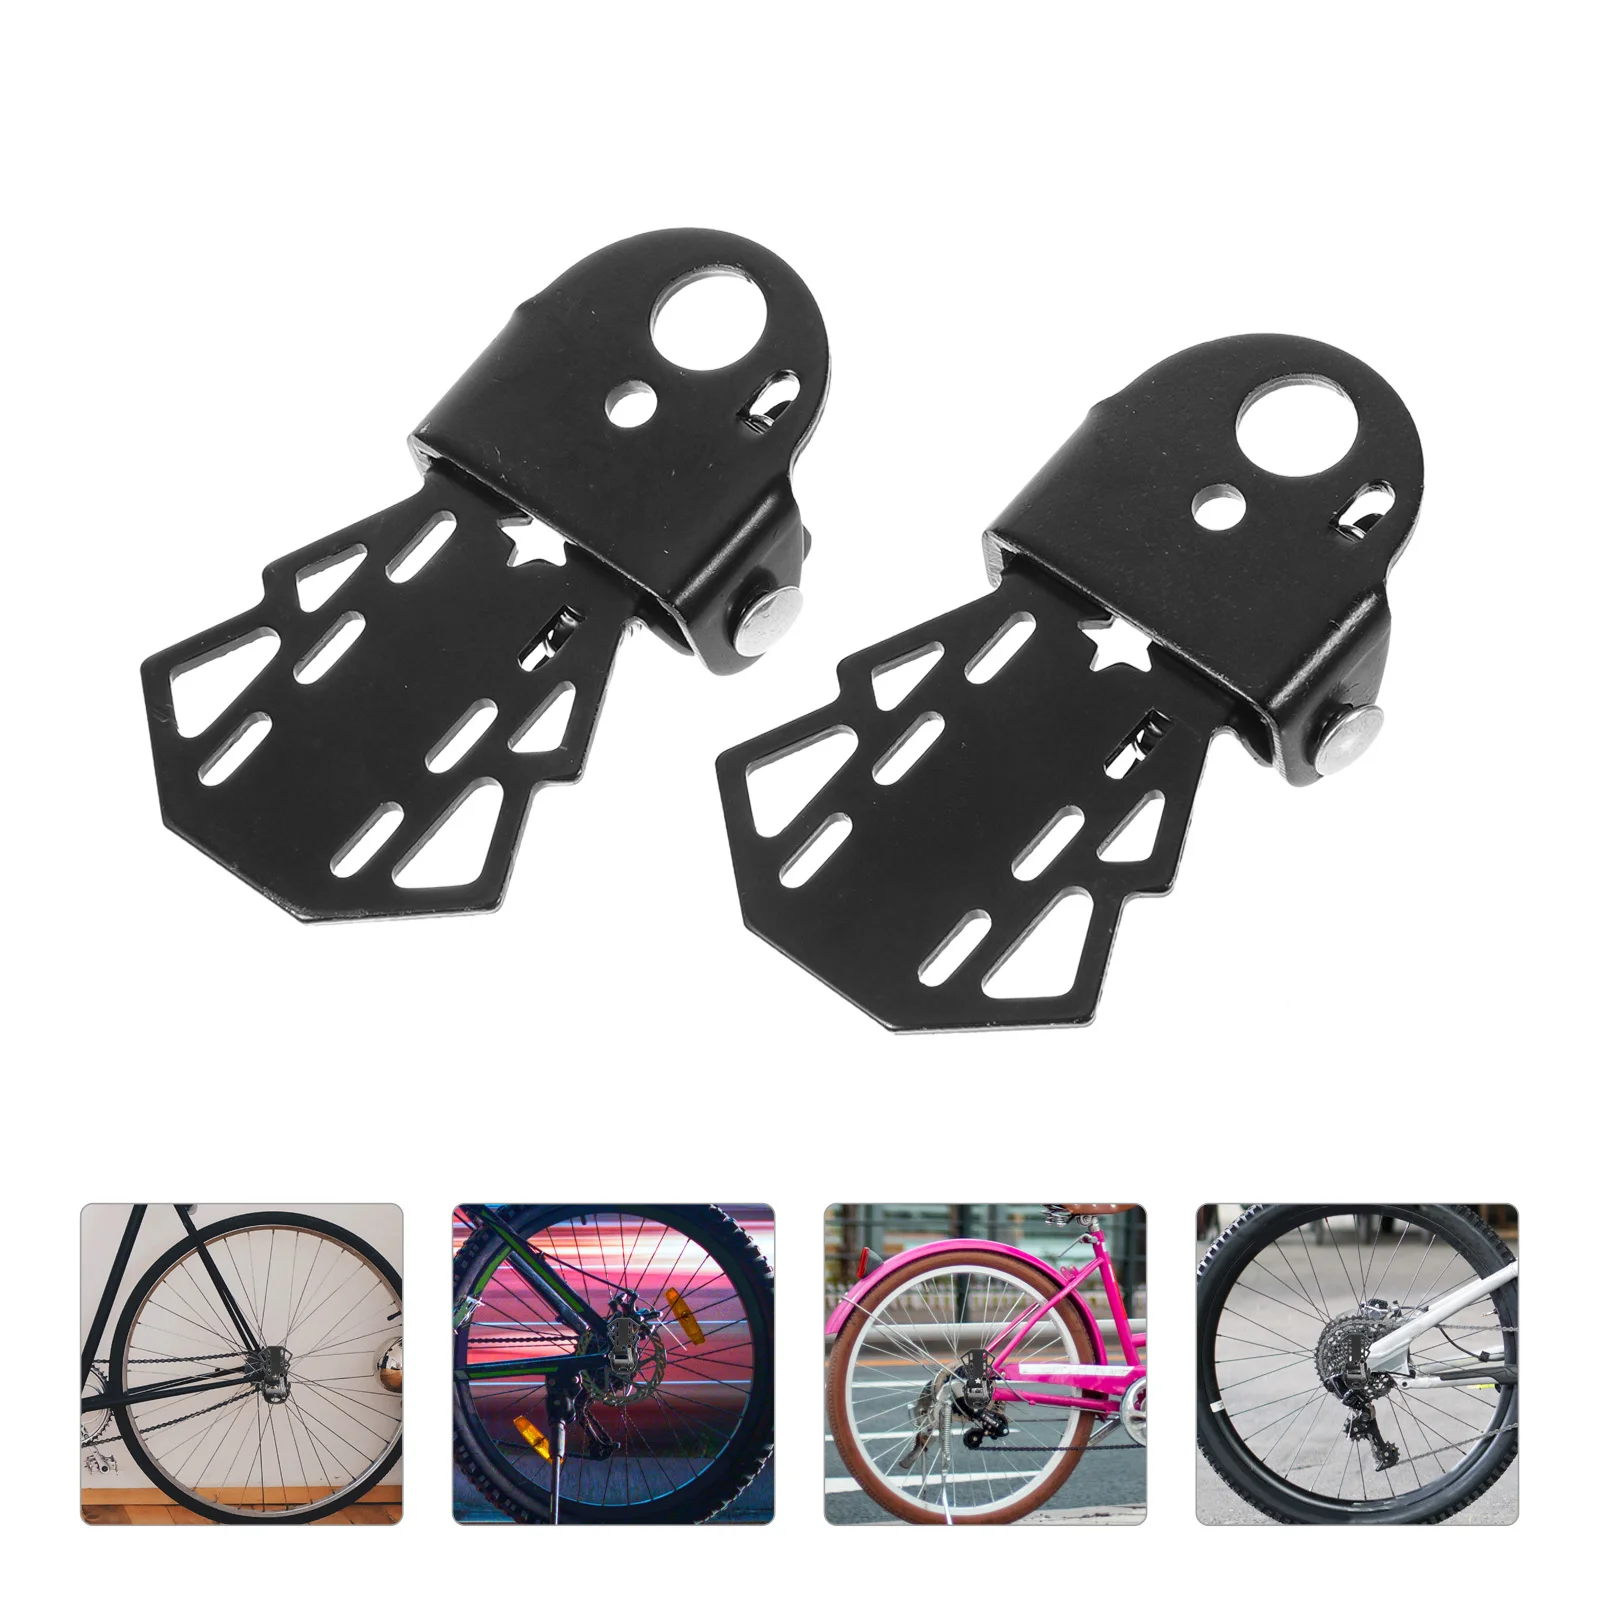 

2 Pcs Foldable Mountain Bike Bicycle Rear Seat Pedals (black) 2pcs Metal Folding Cycling Peg Bikes Pegs Foot Stands Footrest